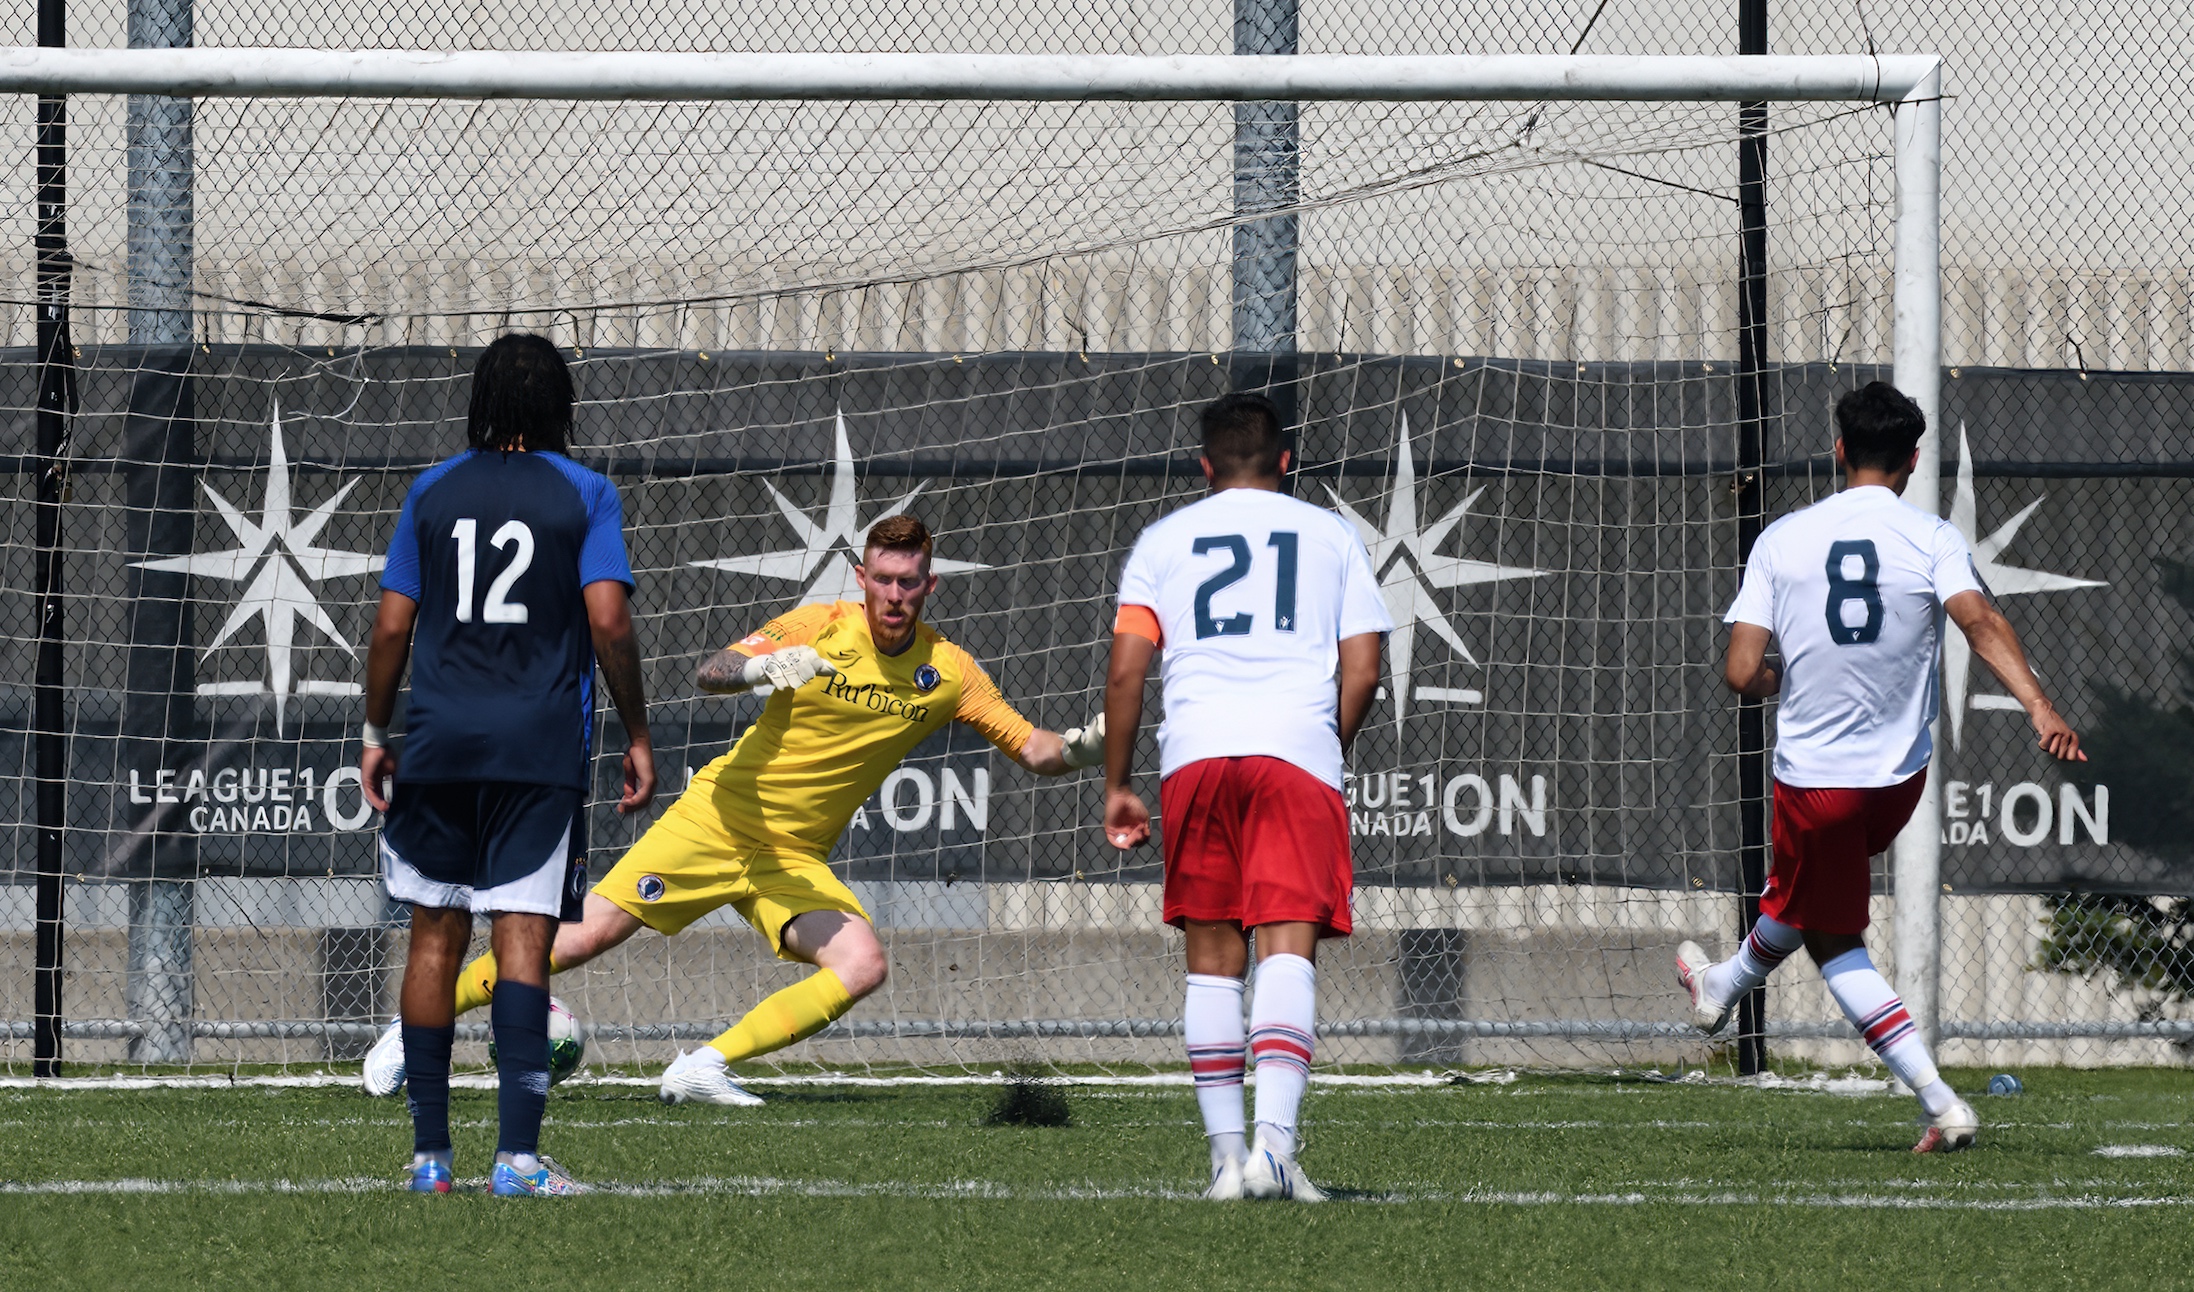 The lead becomes insurmountable. | League1 Ontario Co-Leading scorer Massimo Ferrin sends Blue Devils goalkeeper Luke Birnstingl the wrong way, on a penalty as the Azzurri take a 3 goal lead in the first half. | Bob Twidle